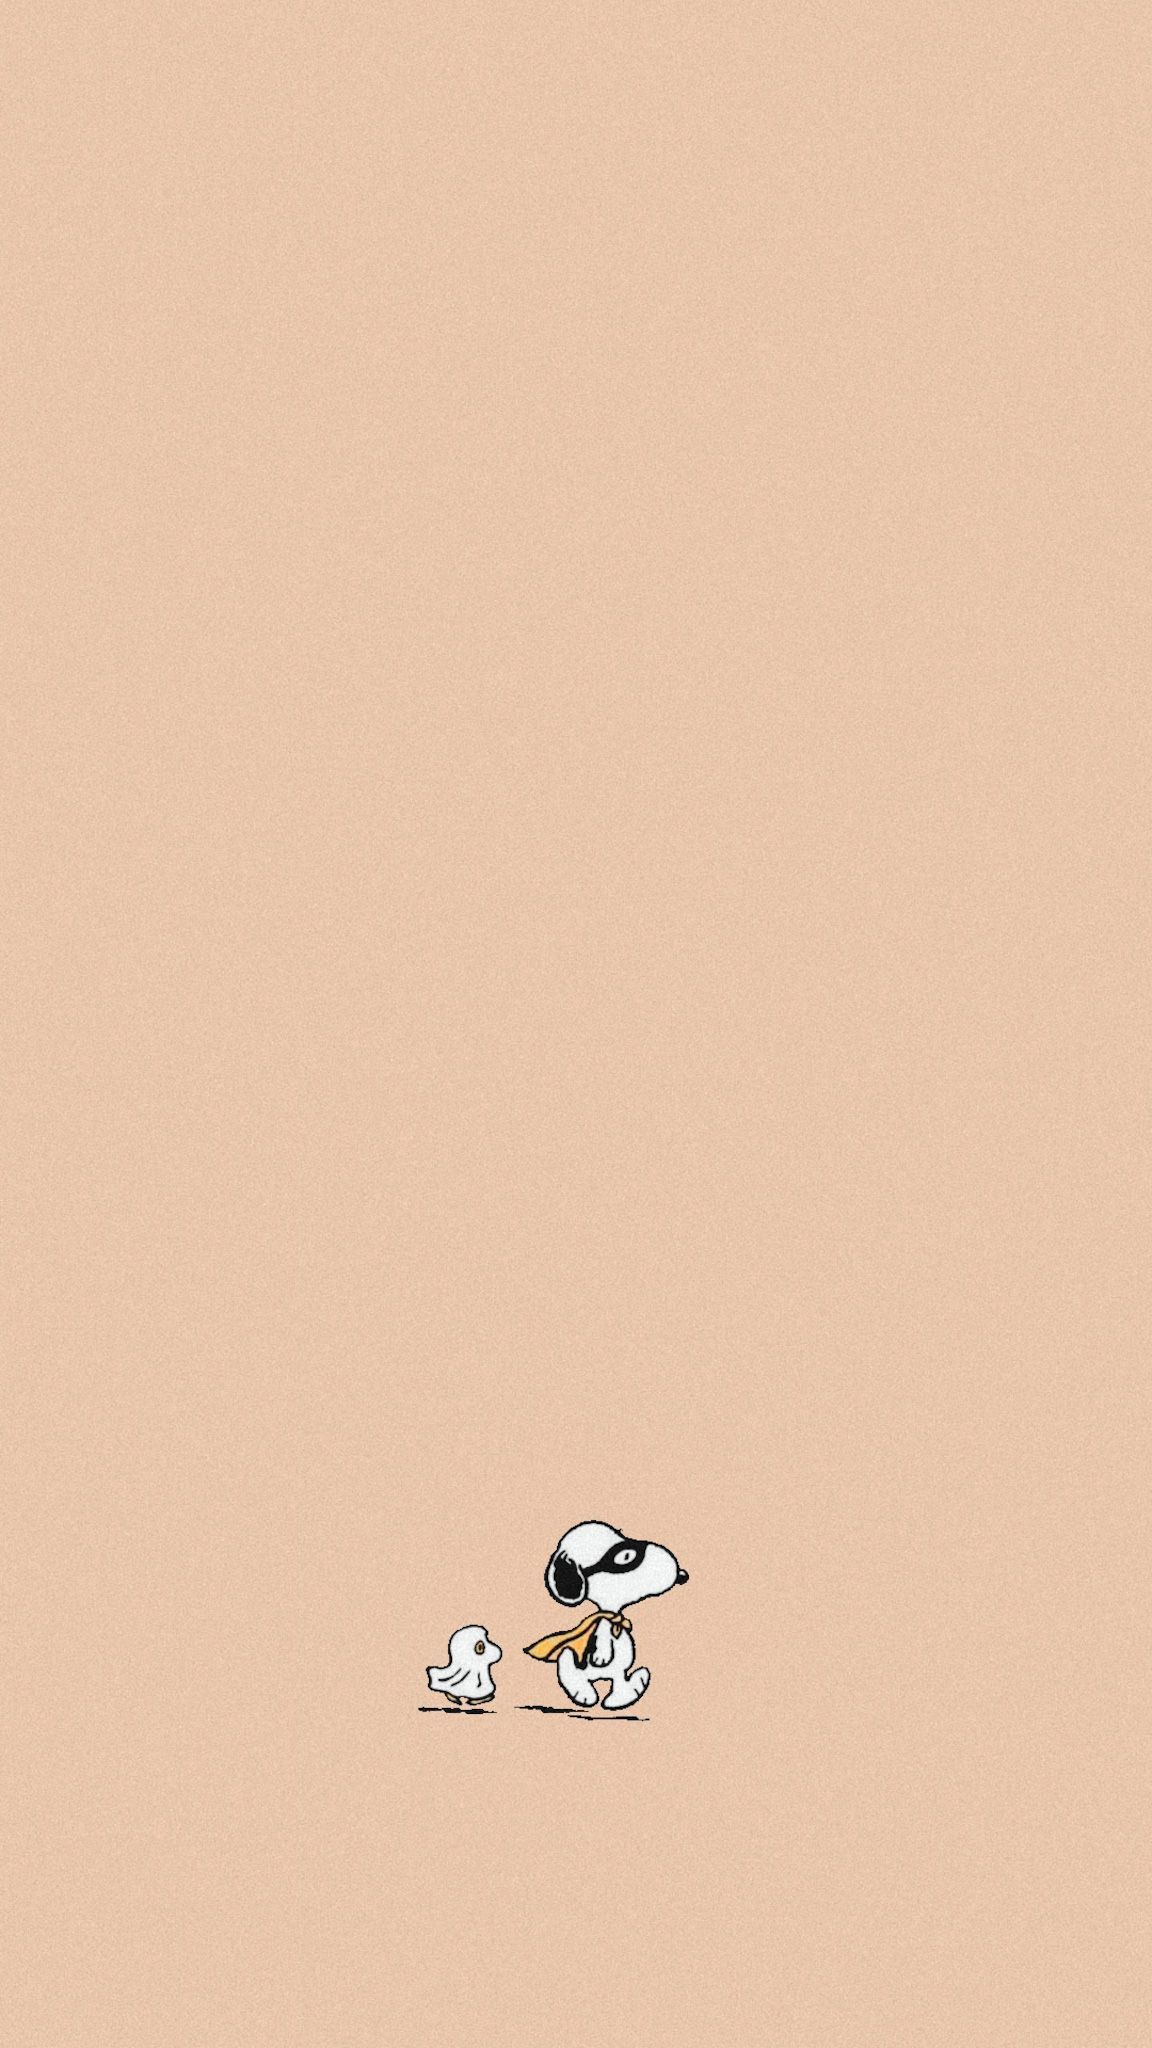 Snoopy phone wallpaper, phone background, wallpaper, phone screensaver, phone background, phone wallpaper, wallpaper phone, phone background, phone screensaver, phone wallpaper, wallpaper phone, phone screensaver, phone wallpaper, phone background, phone screensaver, phone wallpaper, wallpaper phone, phone background, phone screensaver, phone wallpaper, wallpaper phone - Charlie Brown, Snoopy